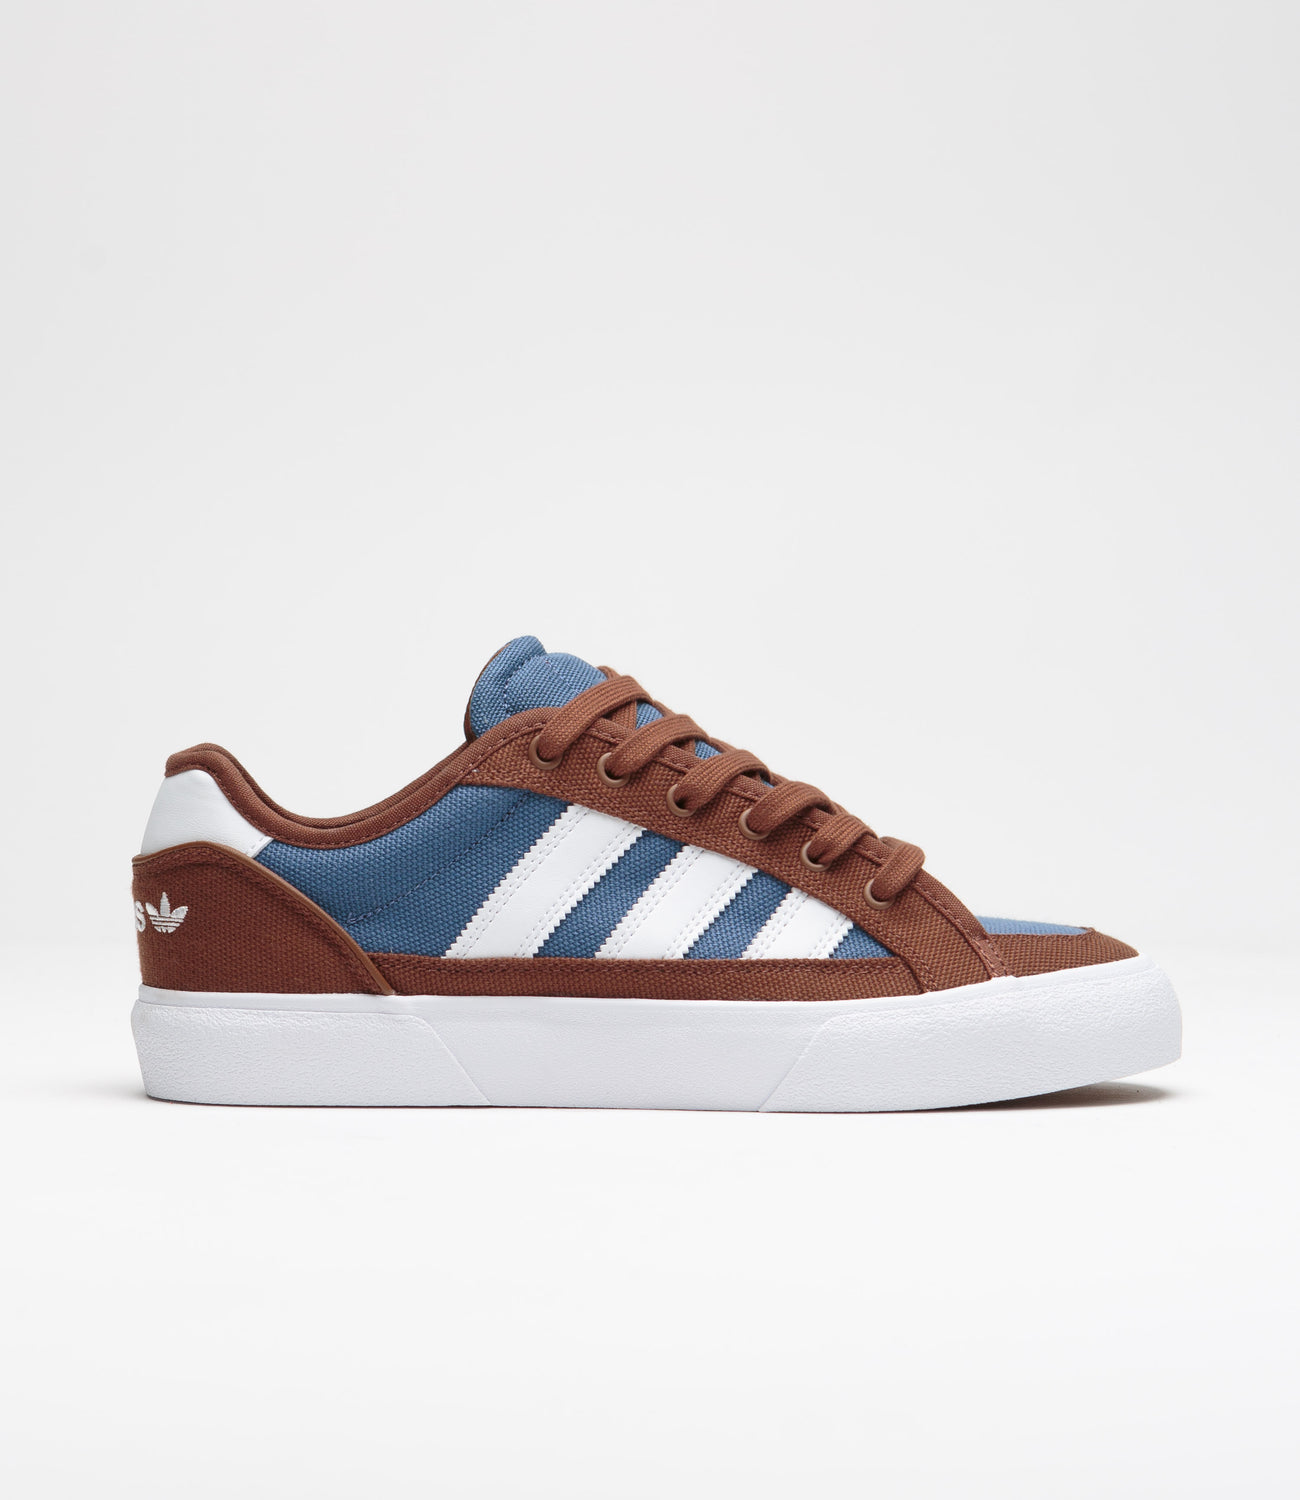 adidas Originals Superstar canvas sneakers in beige and white | ASOS